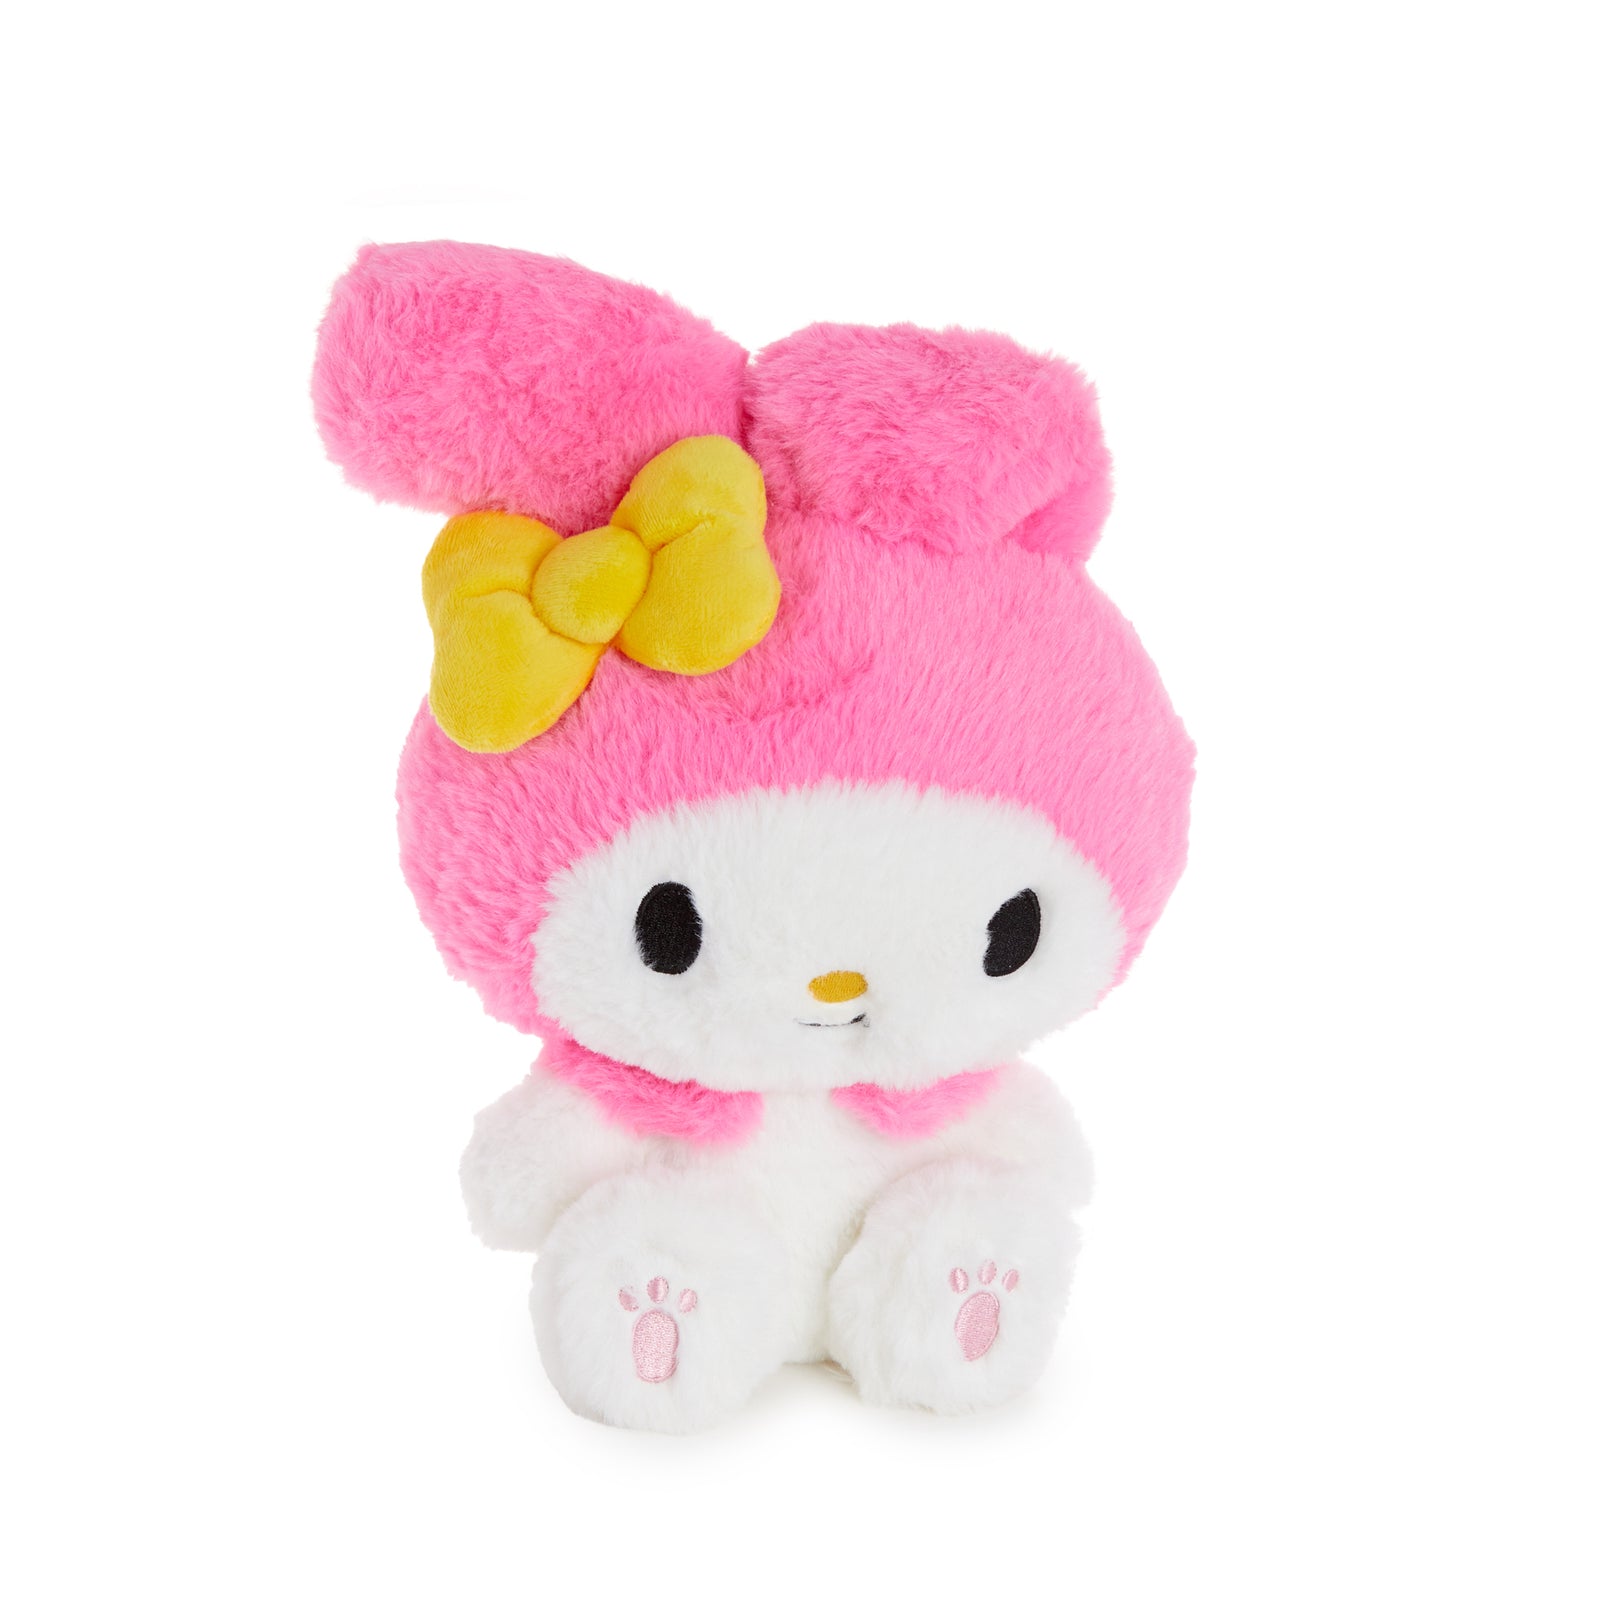 Mother of Sanrio character My Melody gets flak online for